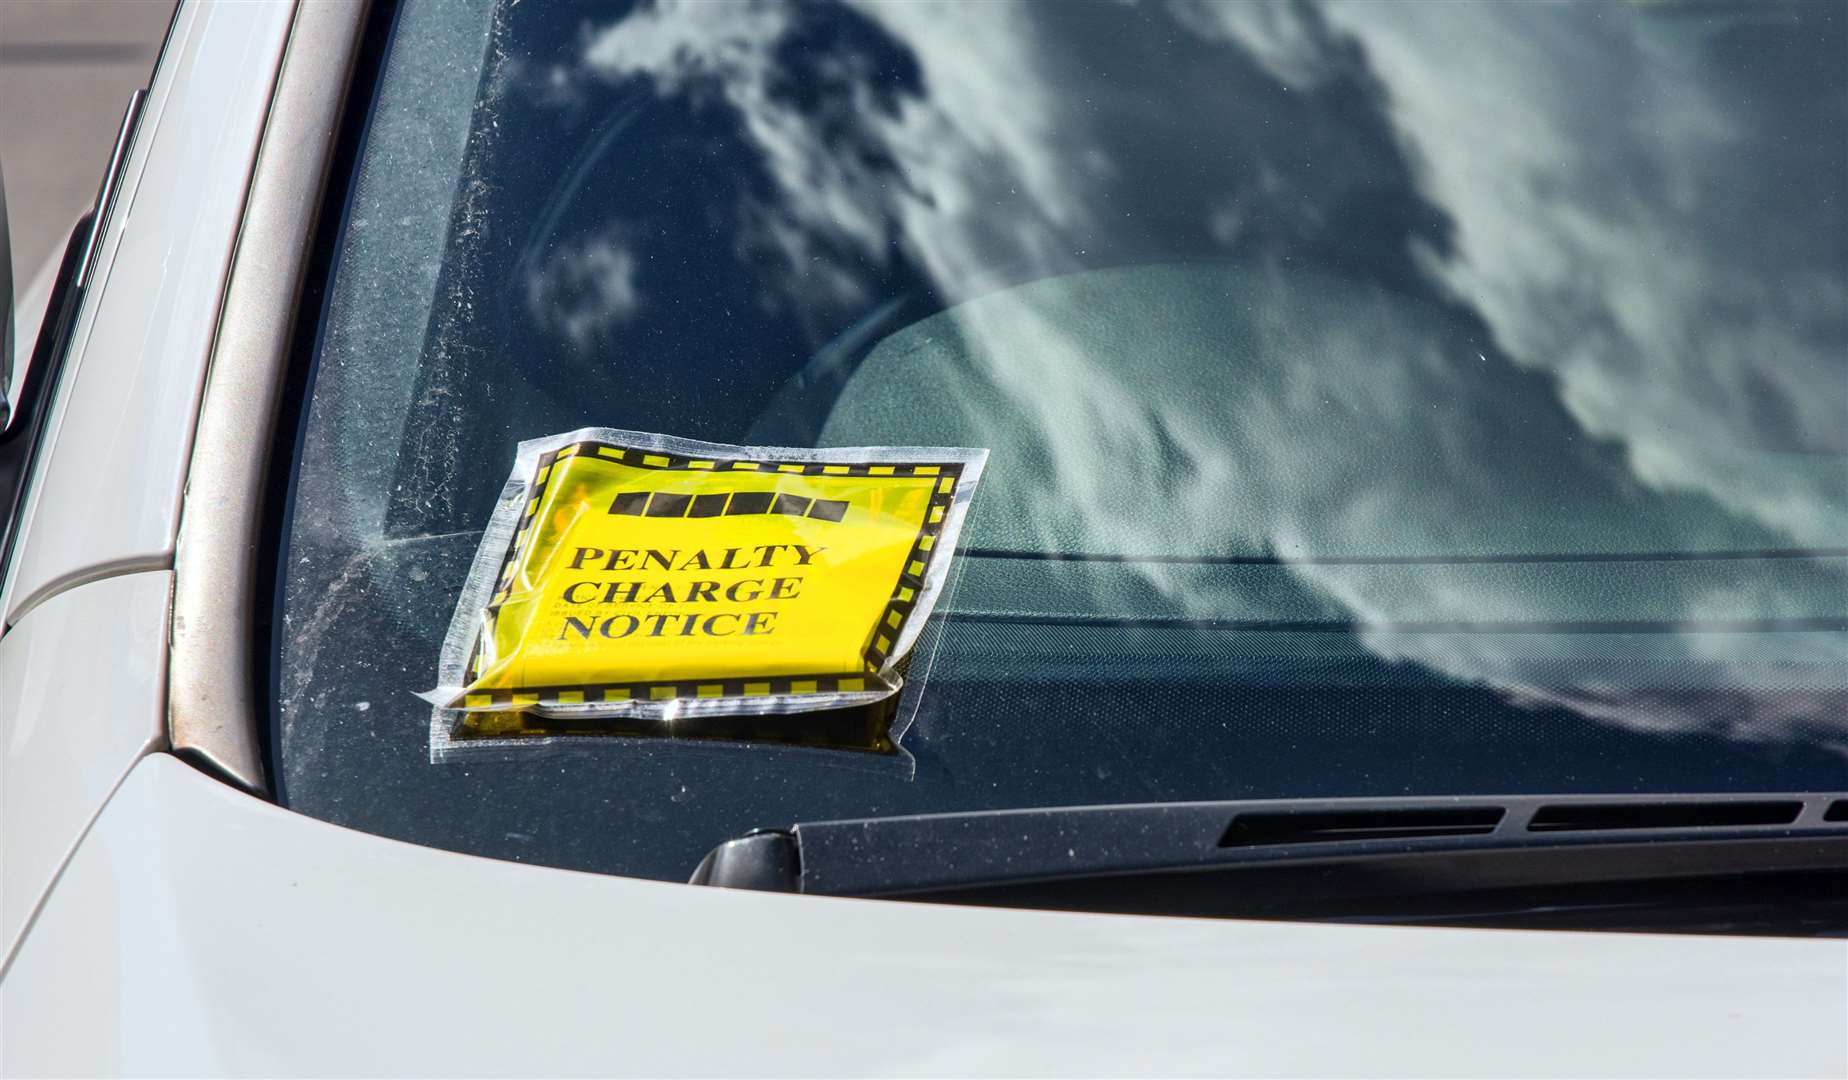 Latest figures show less than 6% of foreign drivers have paid their parking fines in Thanet